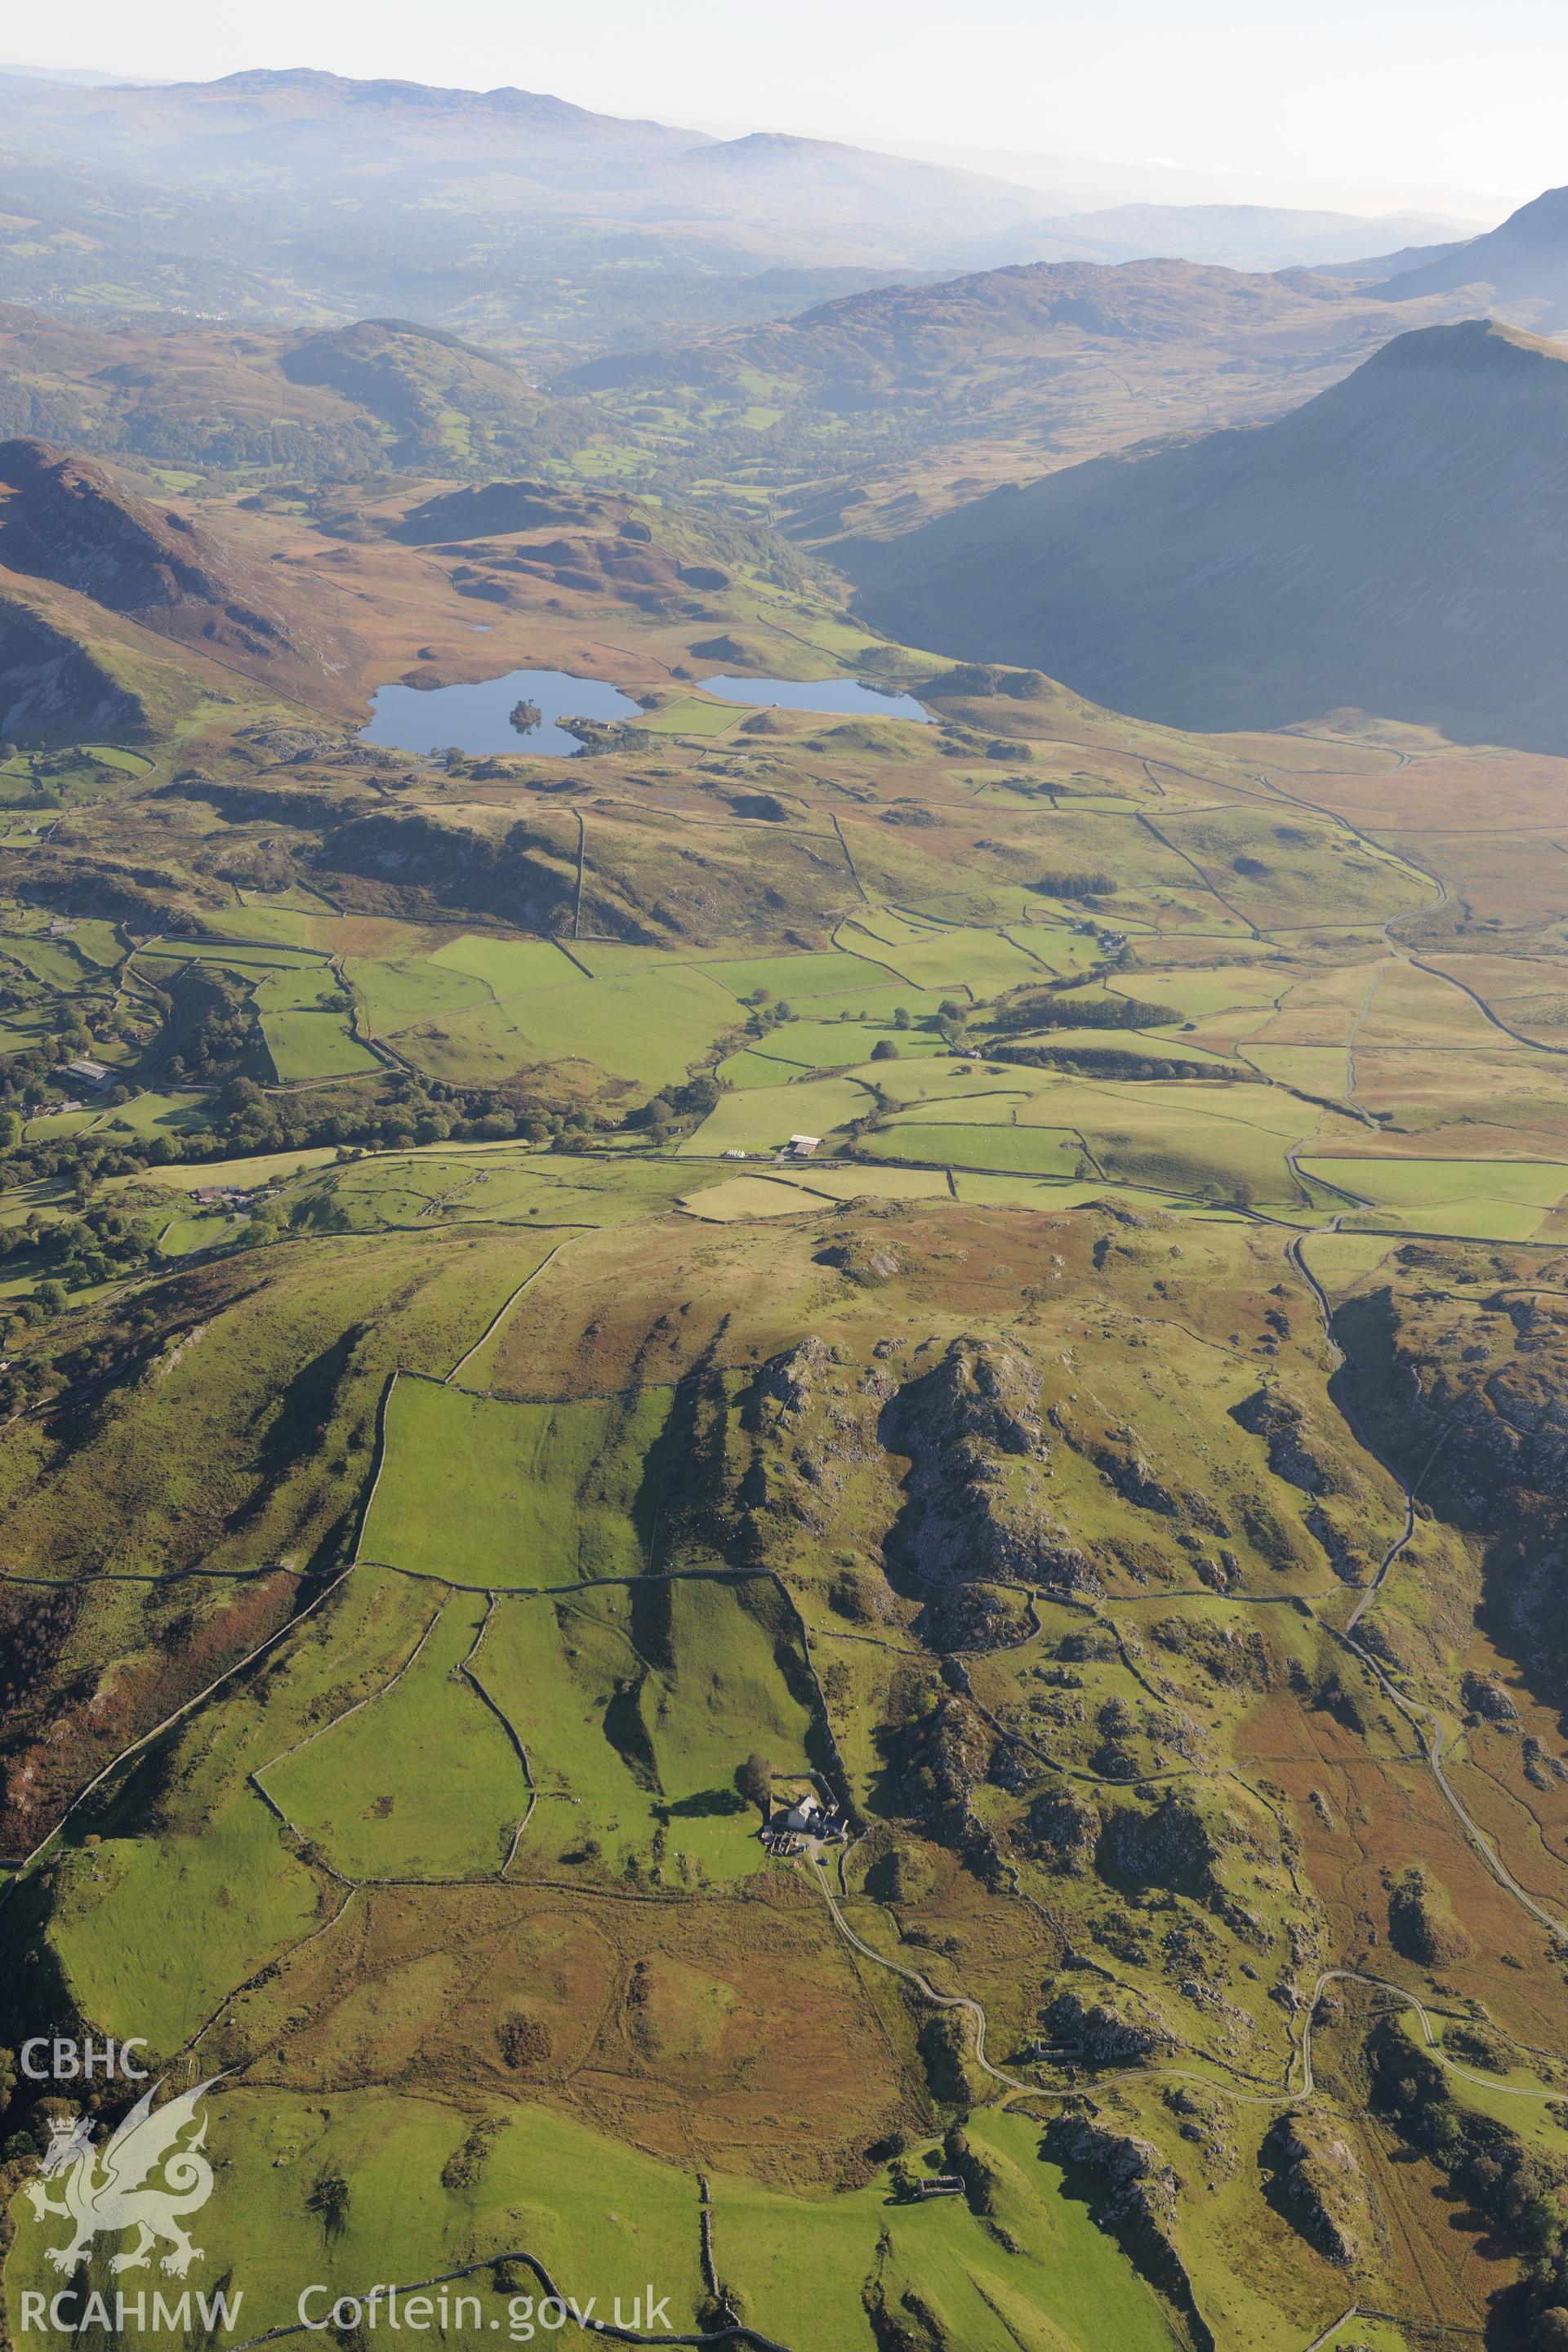 Cadair Idris and Llynnau Cregennen. Oblique aerial photograph taken during the Royal Commission's programme of archaeological aerial reconnaissance by Toby Driver on 2nd October 2015.